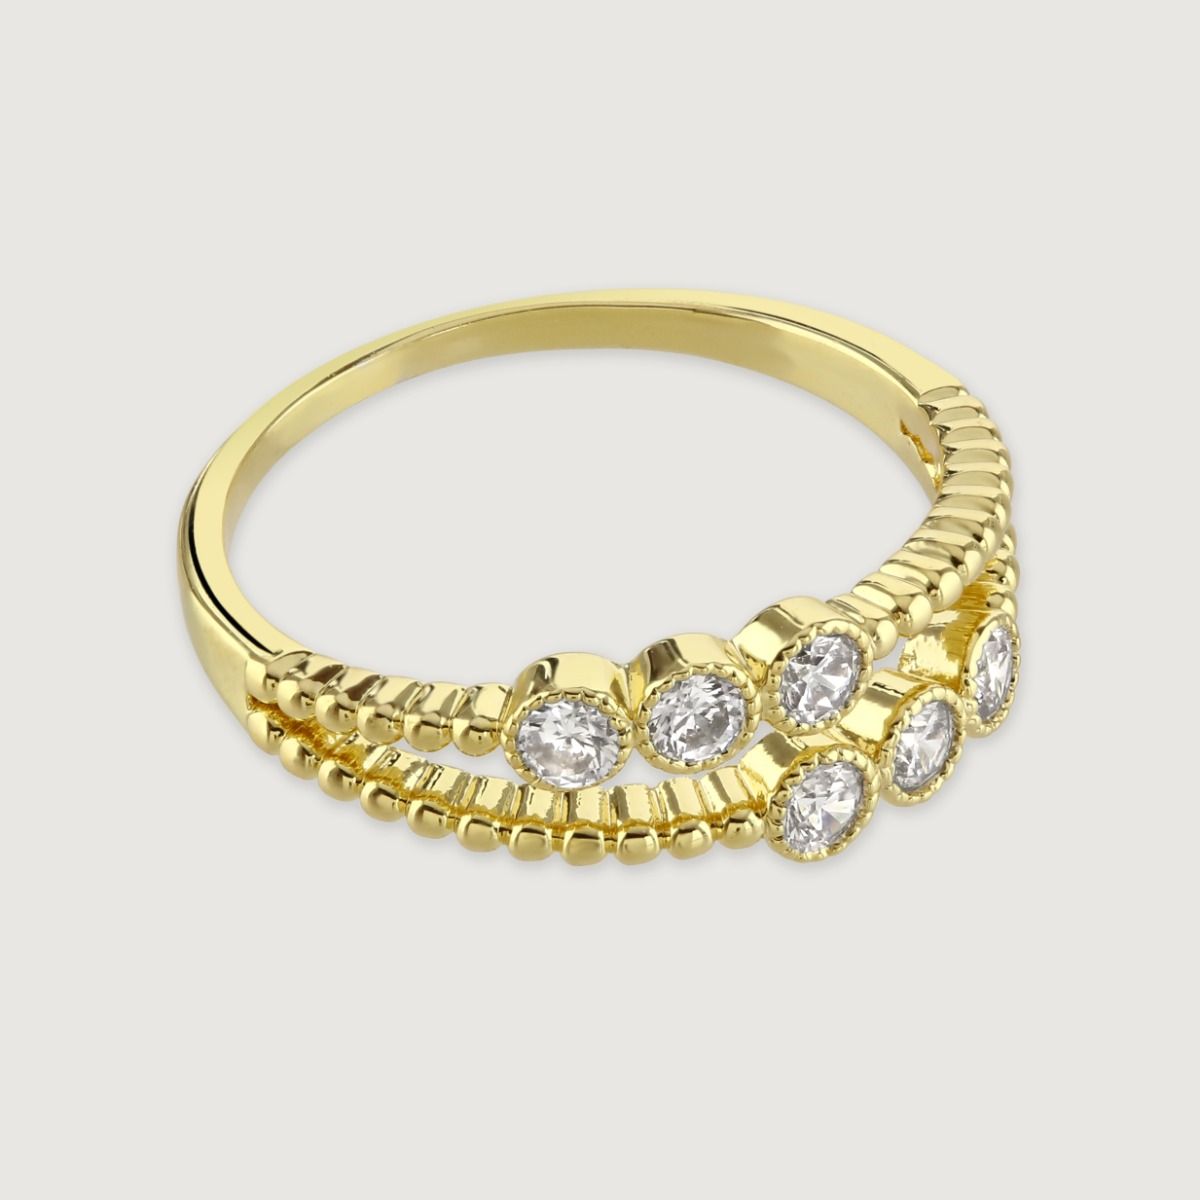 The Crystal Double Layered Ring, pairs our timeless crystals with a layered rope band. This ring can be styled as a statement piece or elevated with accompanying rings. 